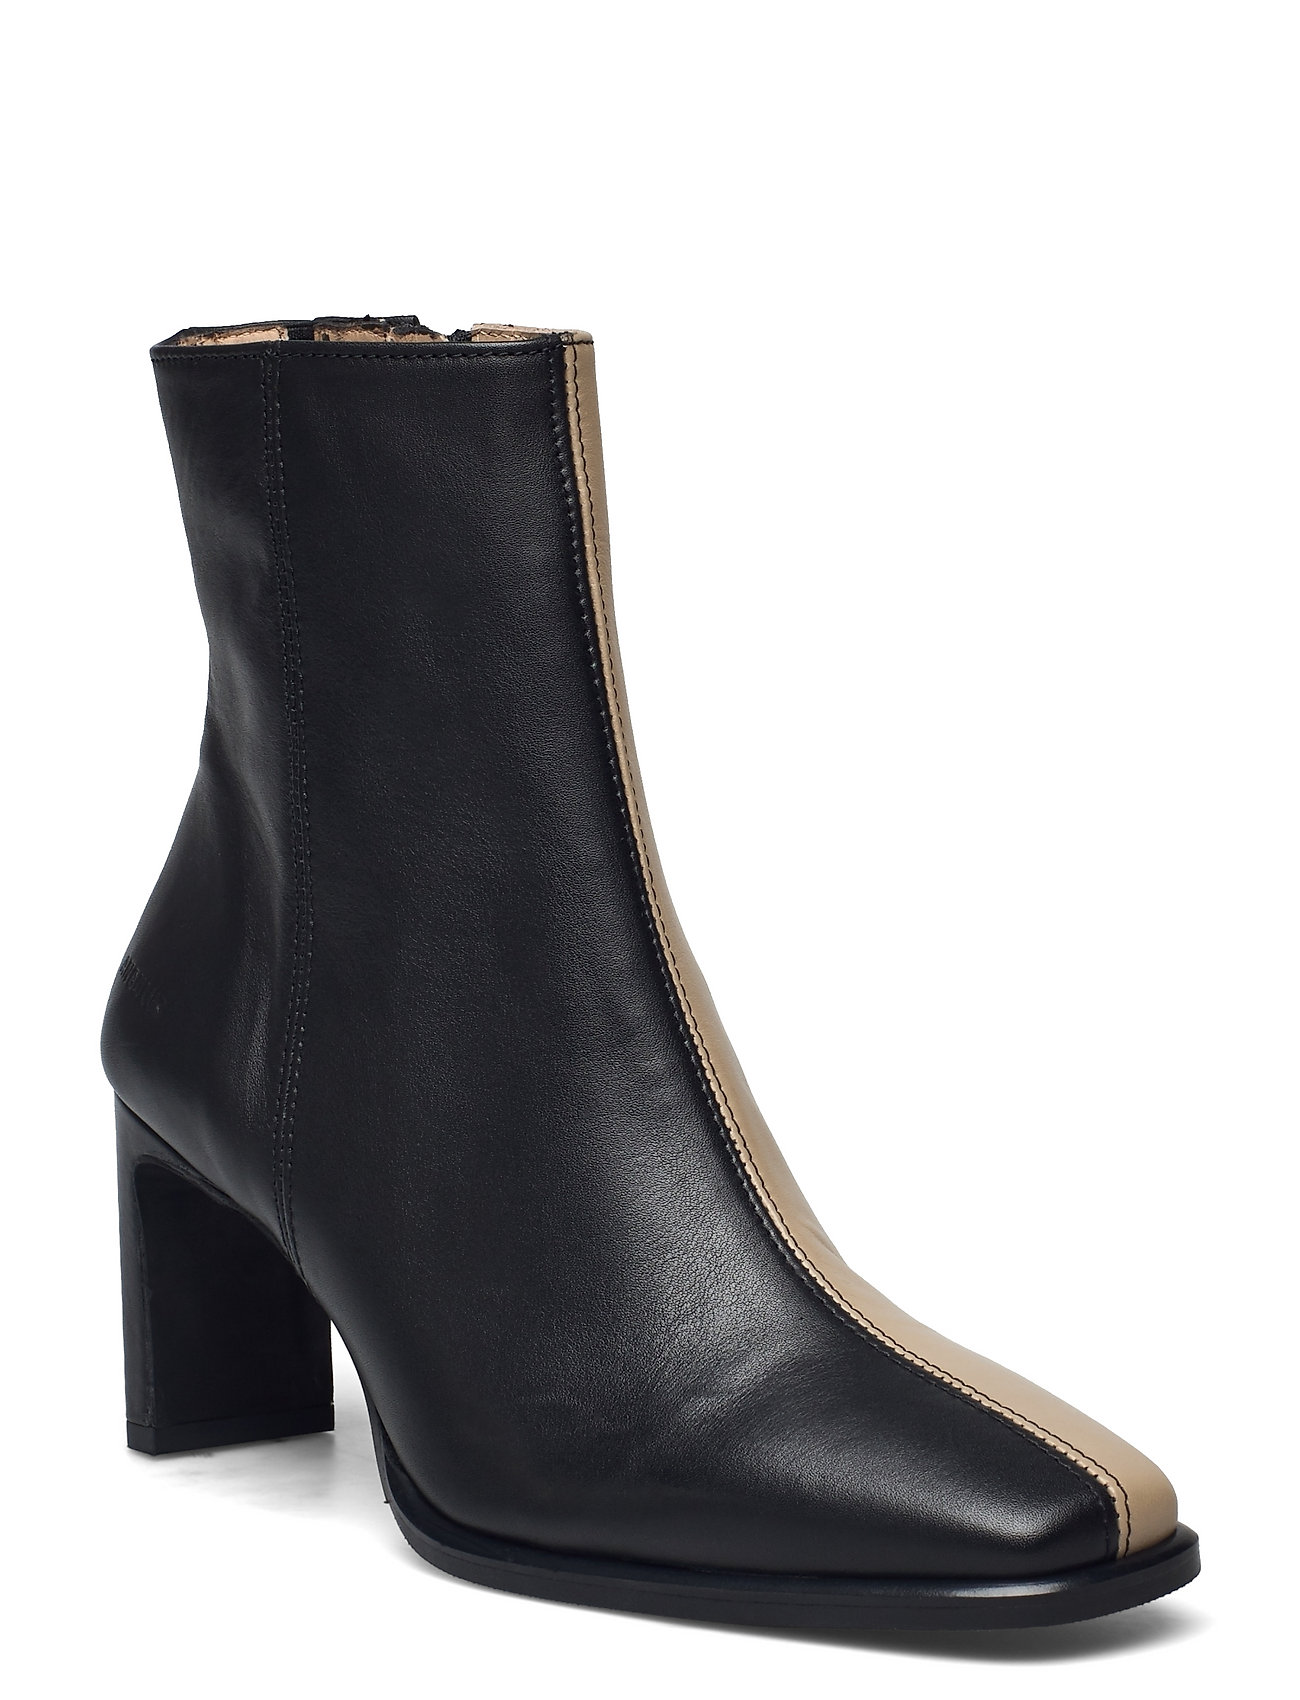 Bootie - Block Heel - With Zippe Shoes Boots Ankle Boots Ankle Boot - Heel Musta ANGULUS